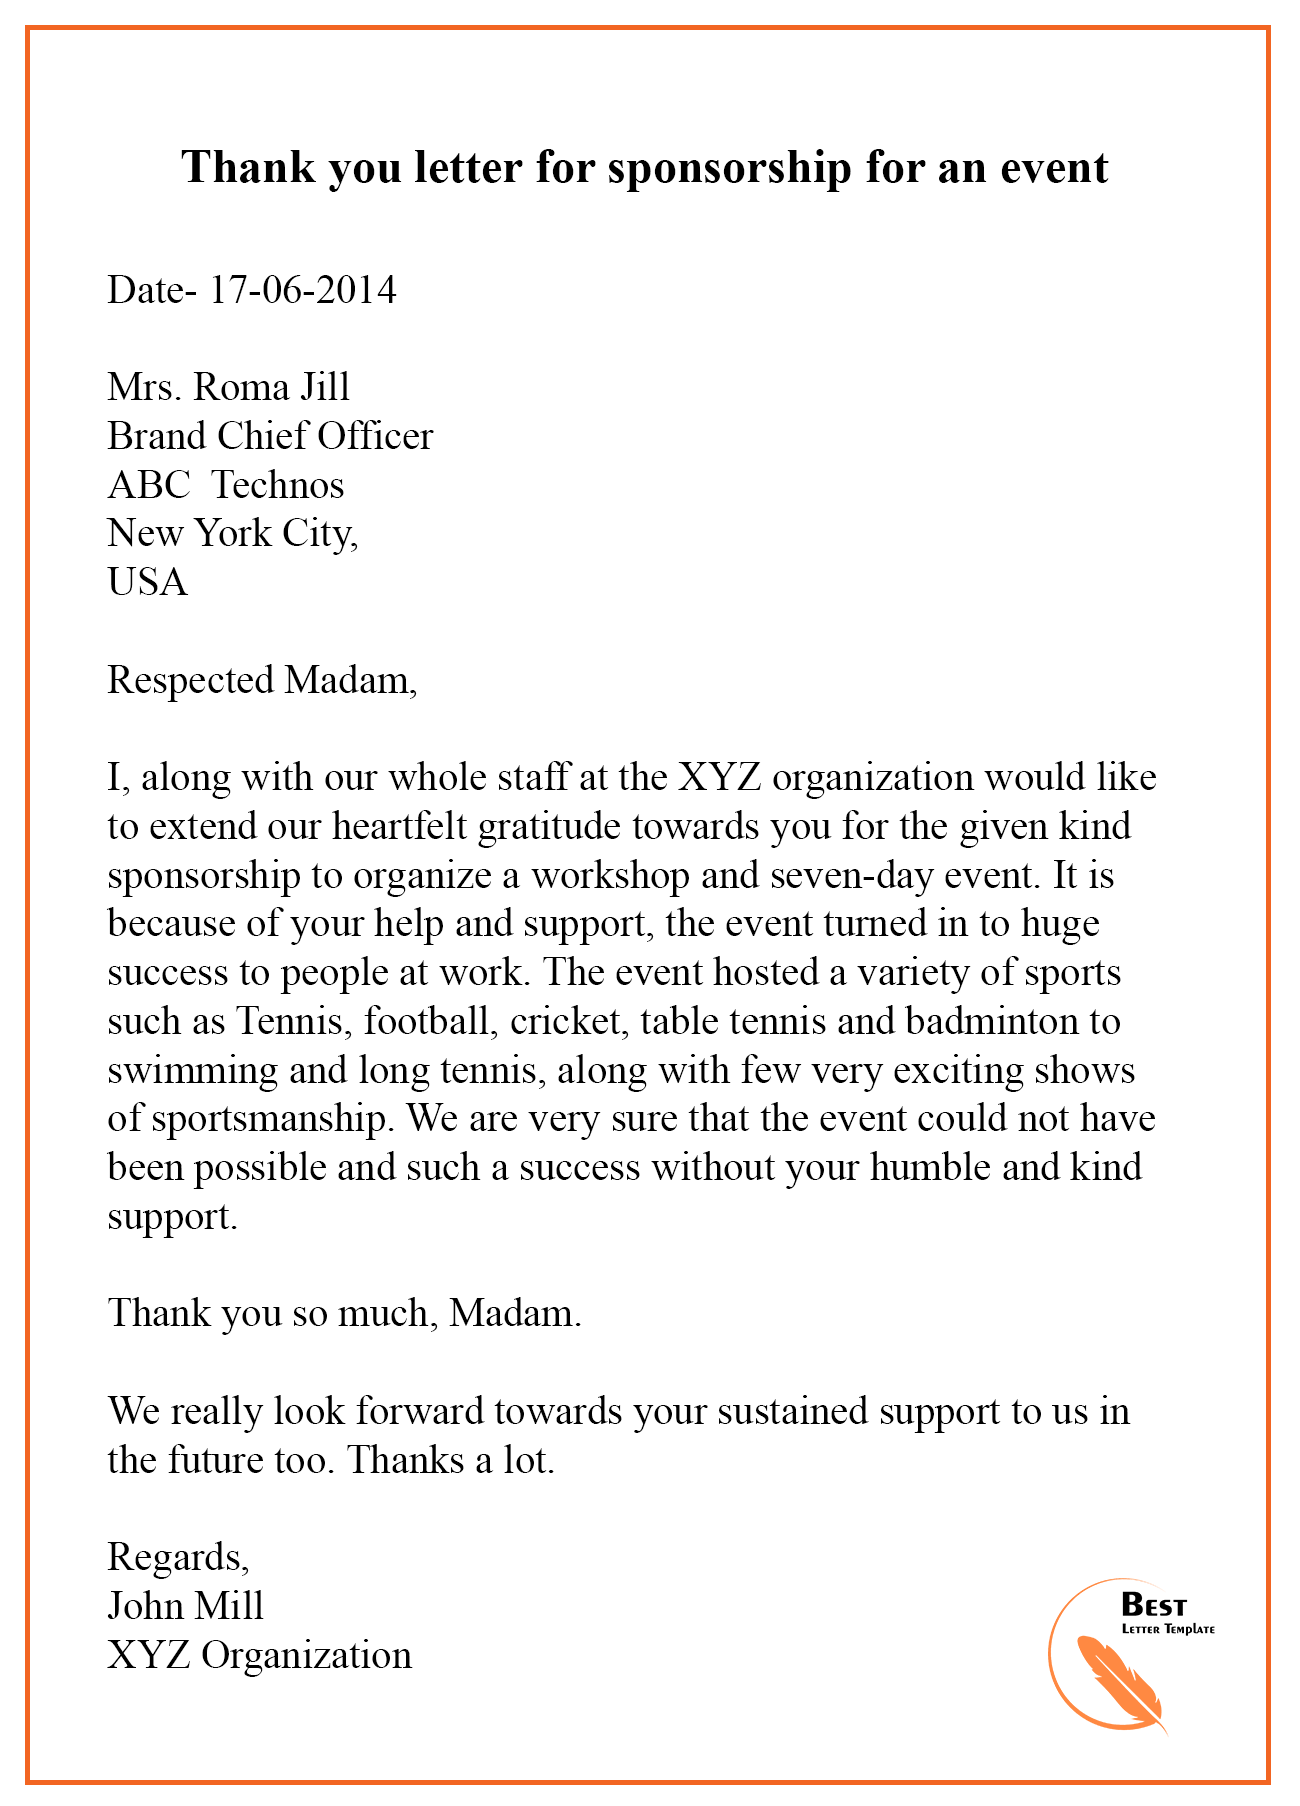 Thank You Letter To Sponsors from bestlettertemplate.com